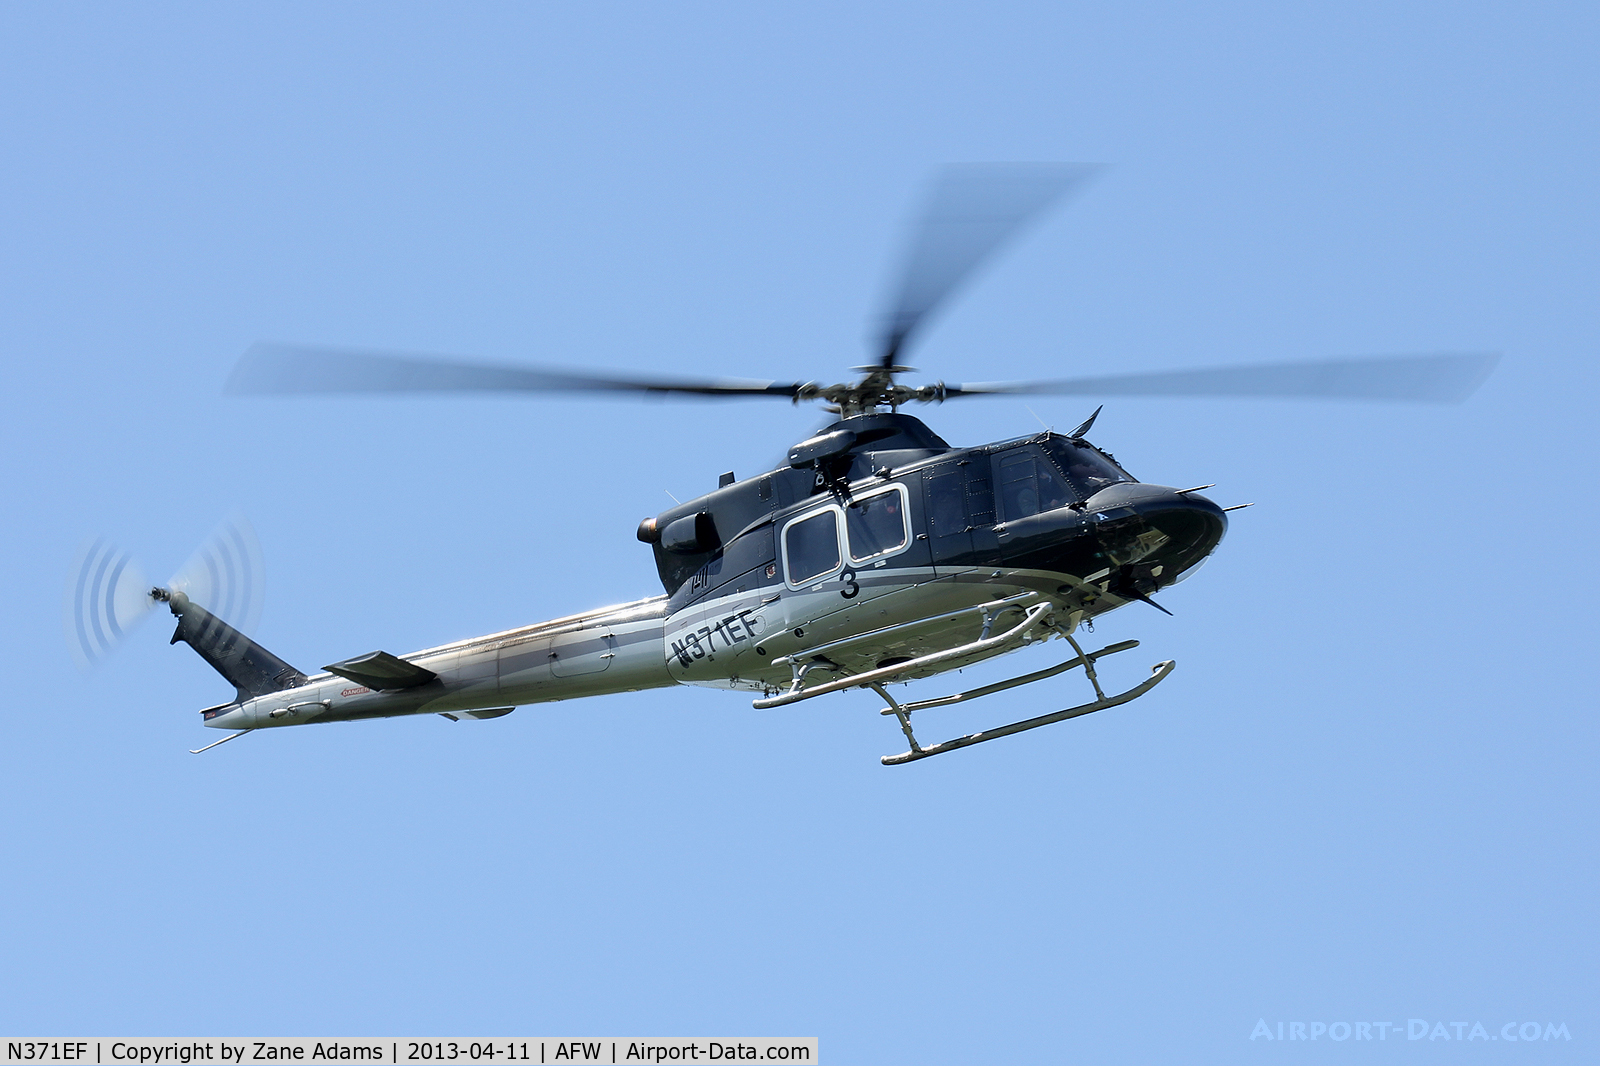 N371EF, 2007 Bell 412EP C/N 36448, At Alliance Airport - Fort Worth, TX